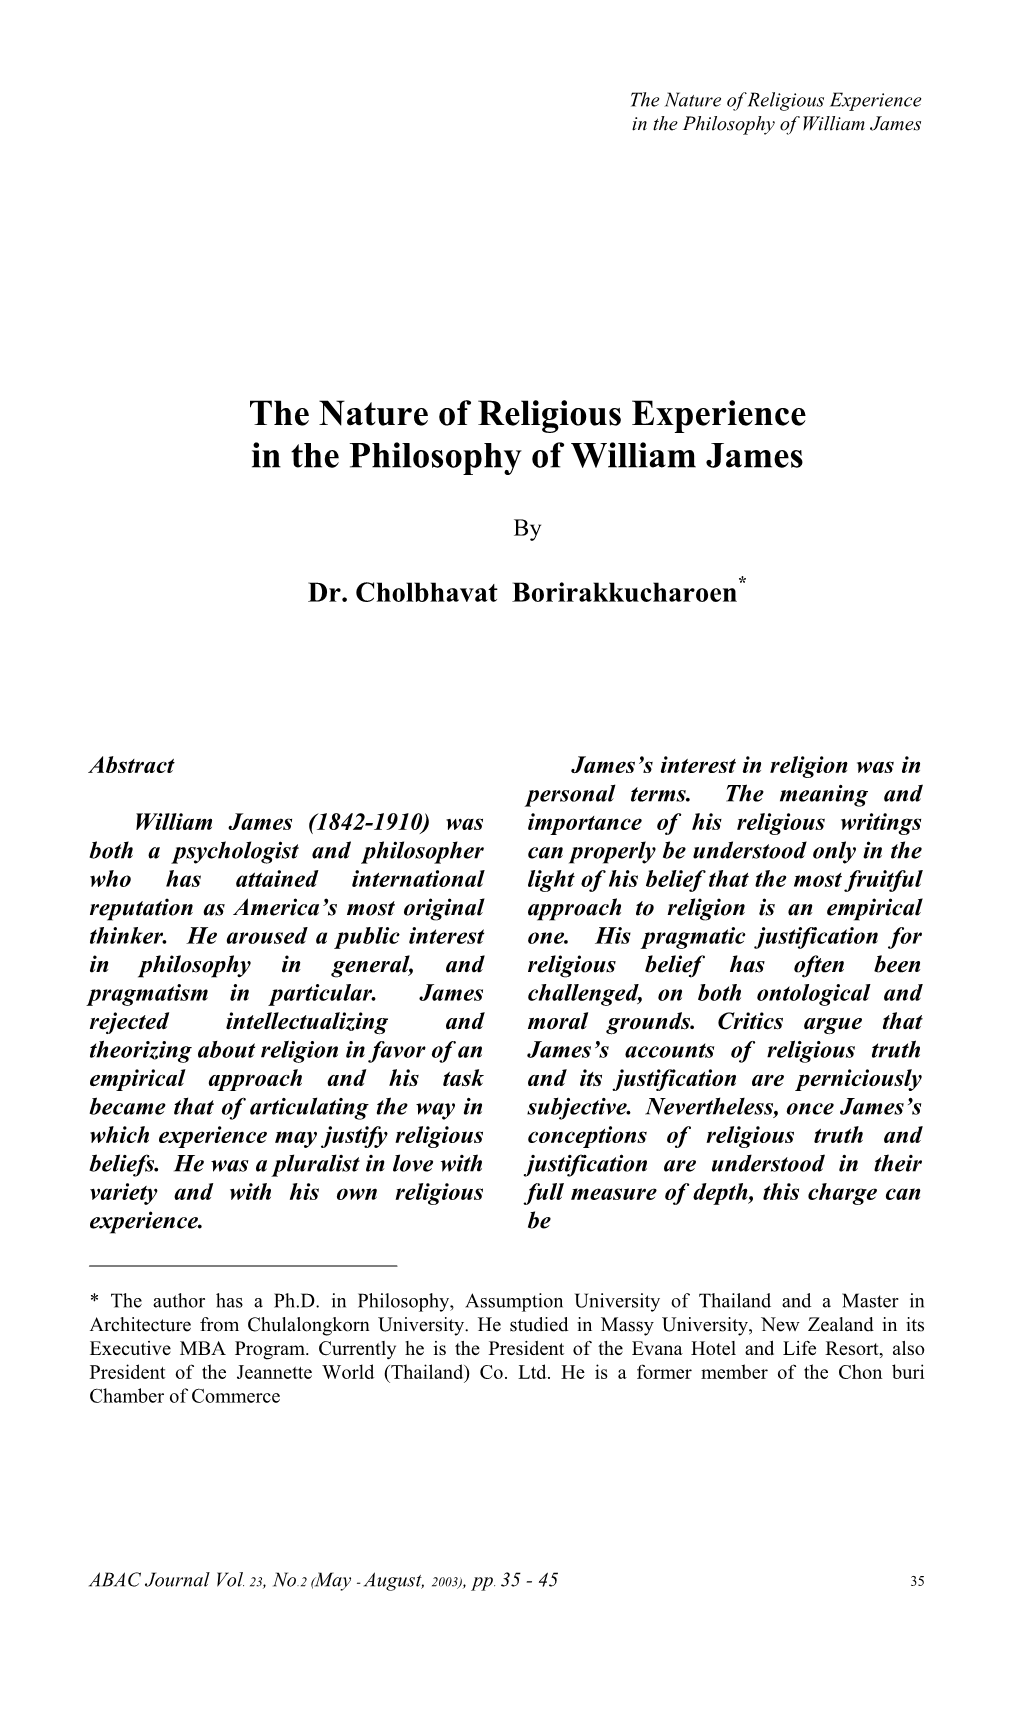 The Nature of Religious Experience in the Philosophy of William James